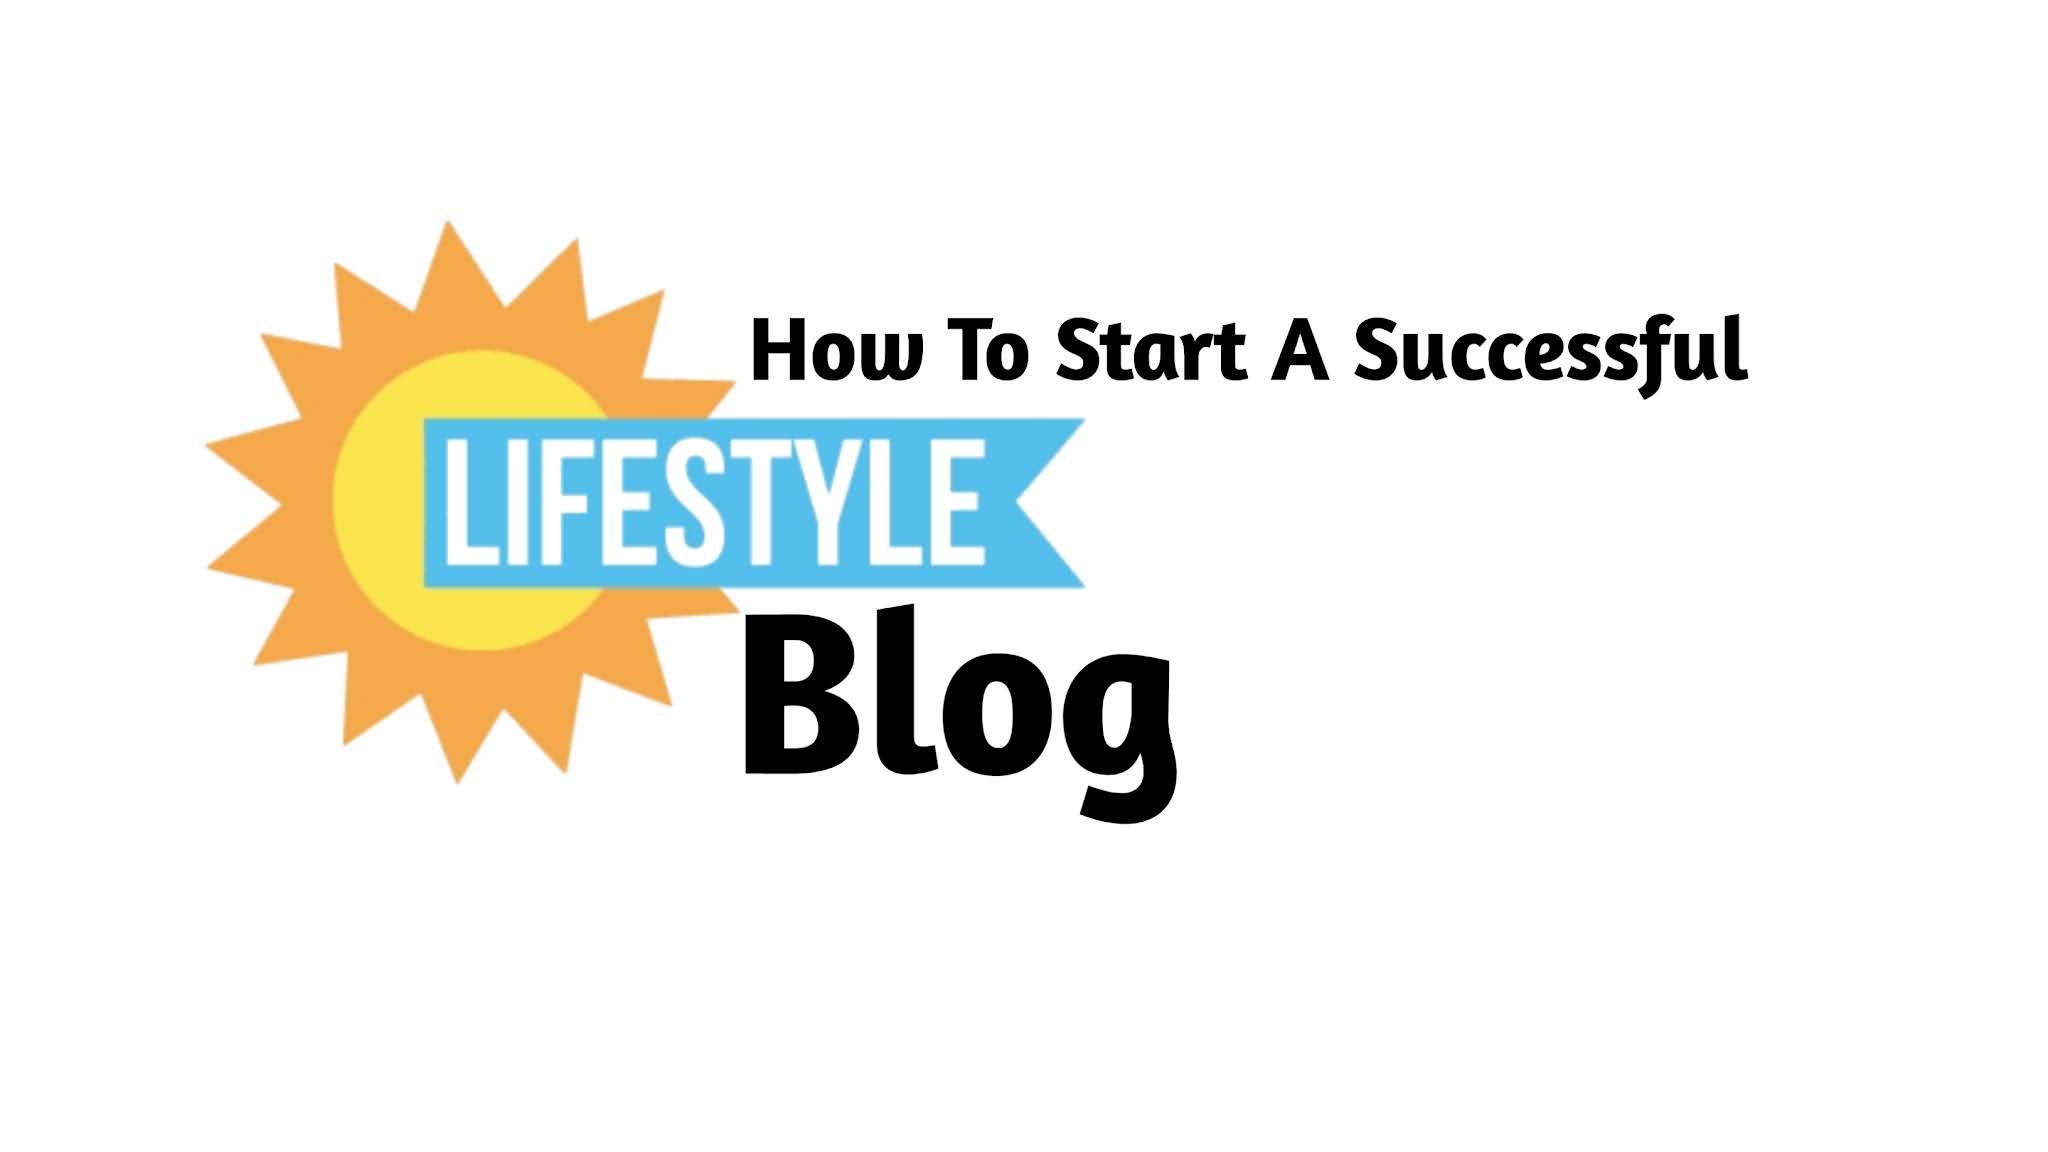 How To Start A Successful Lifestyle Blog